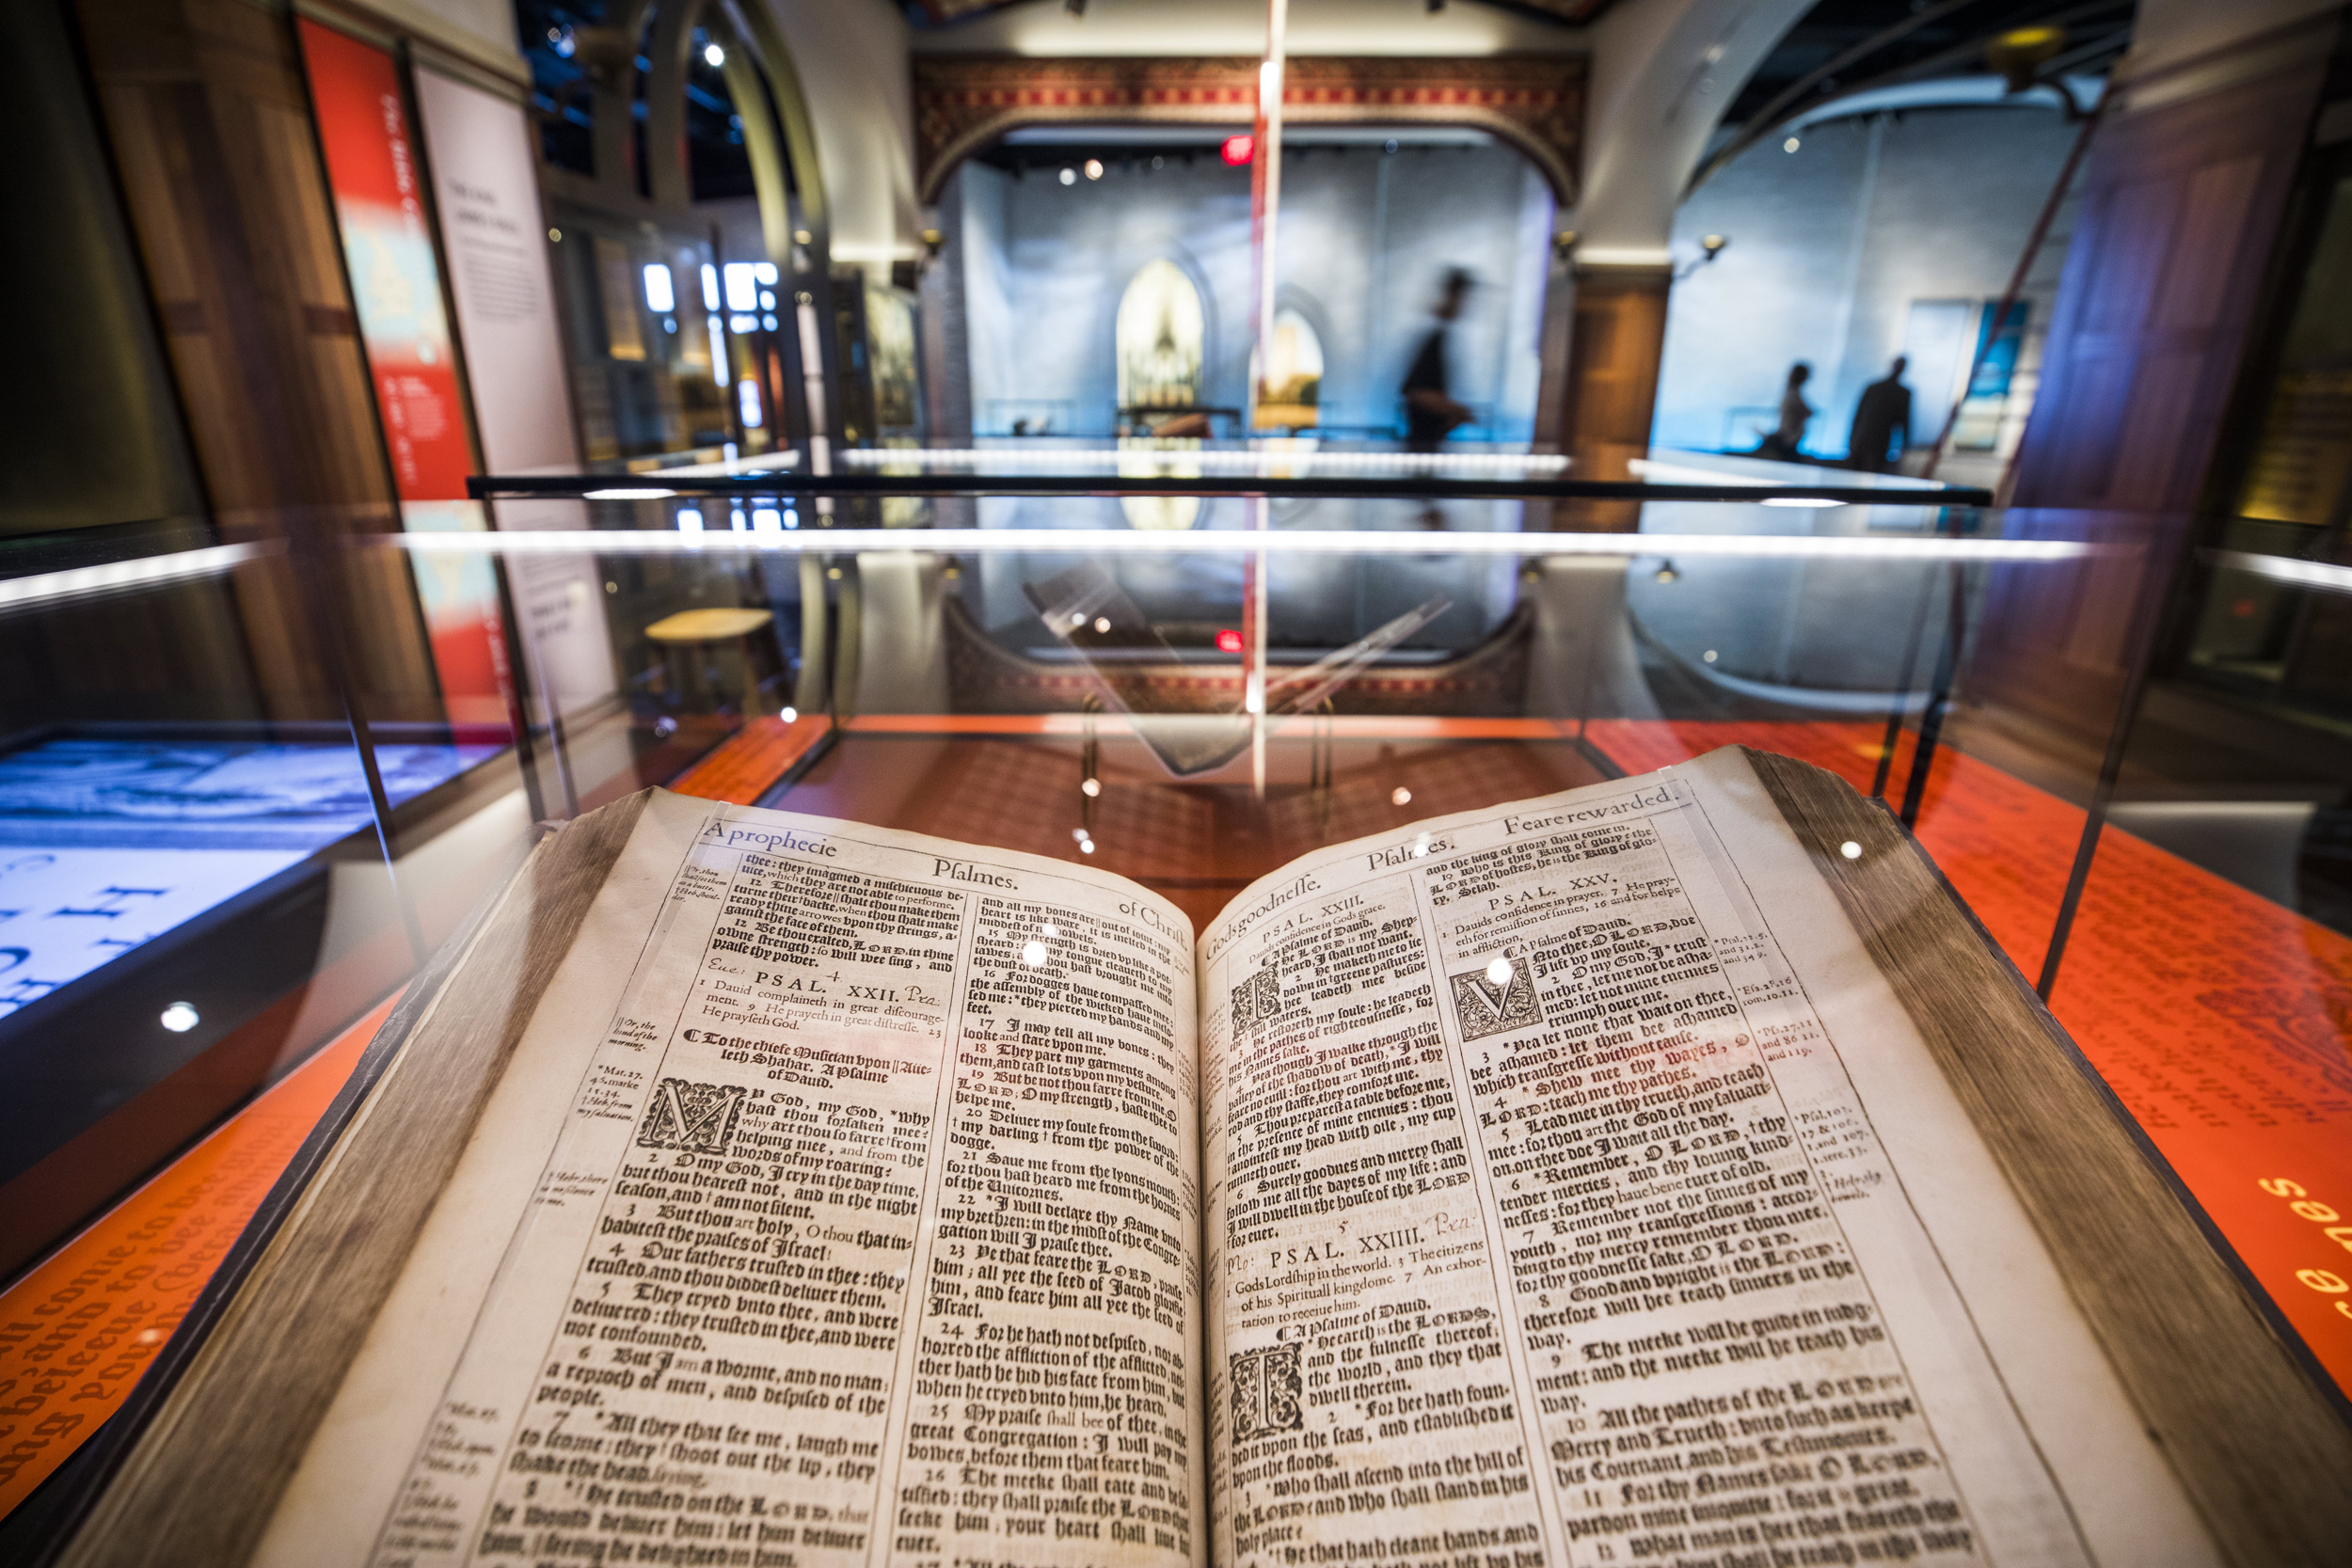 An inside look at the Museum of the Bible in Washington, D.C.